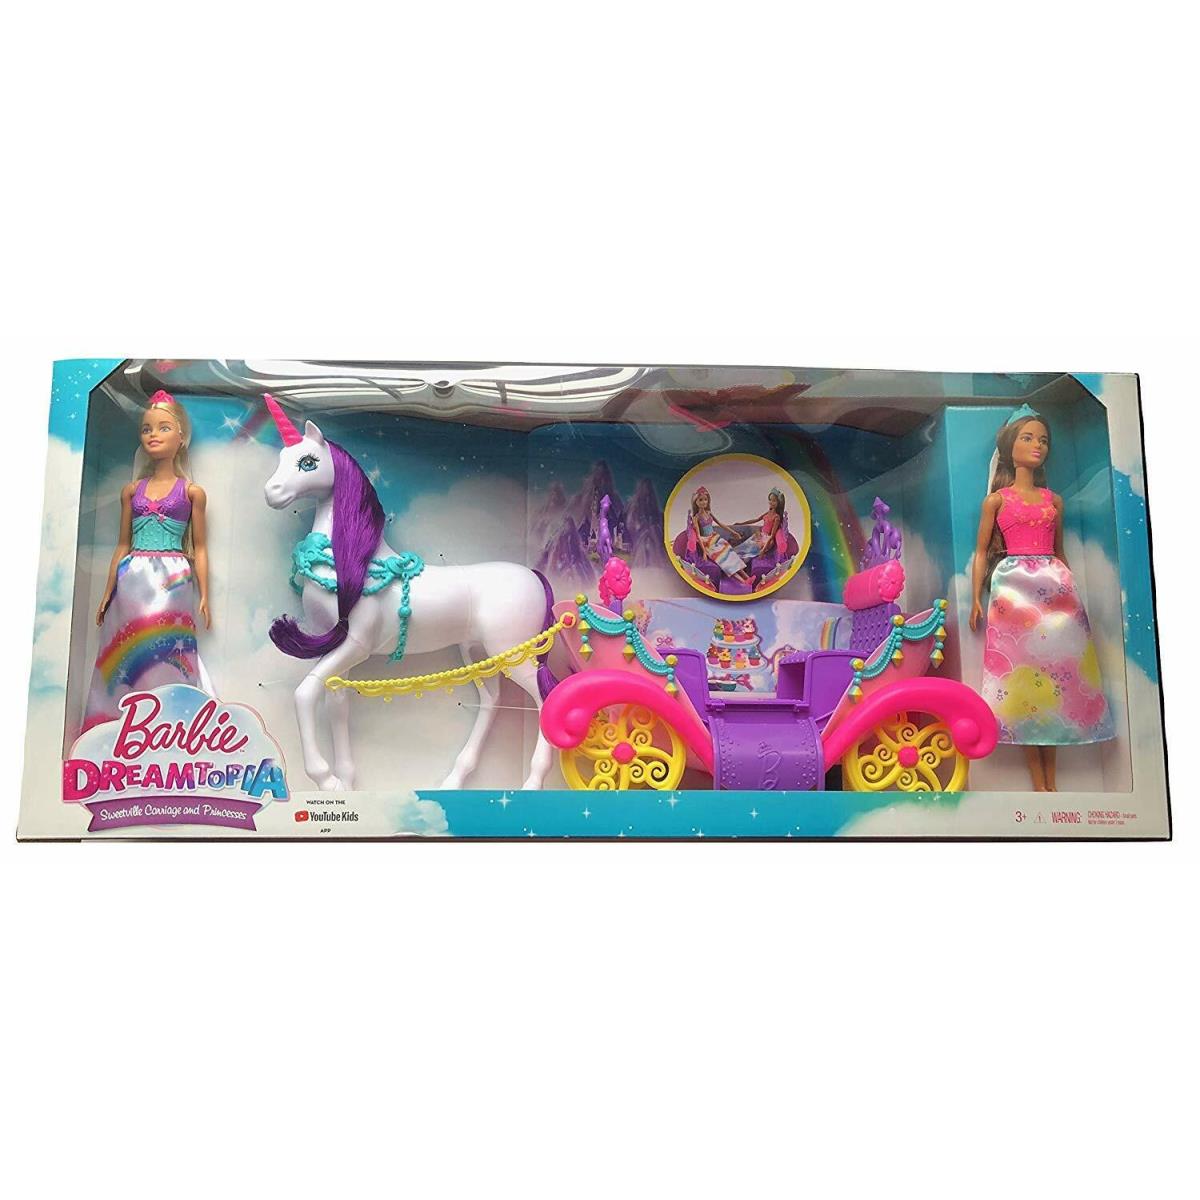 Dreamtopia Barbie Sweetville Carriage and Barbie Doll Princesses Playset w 2